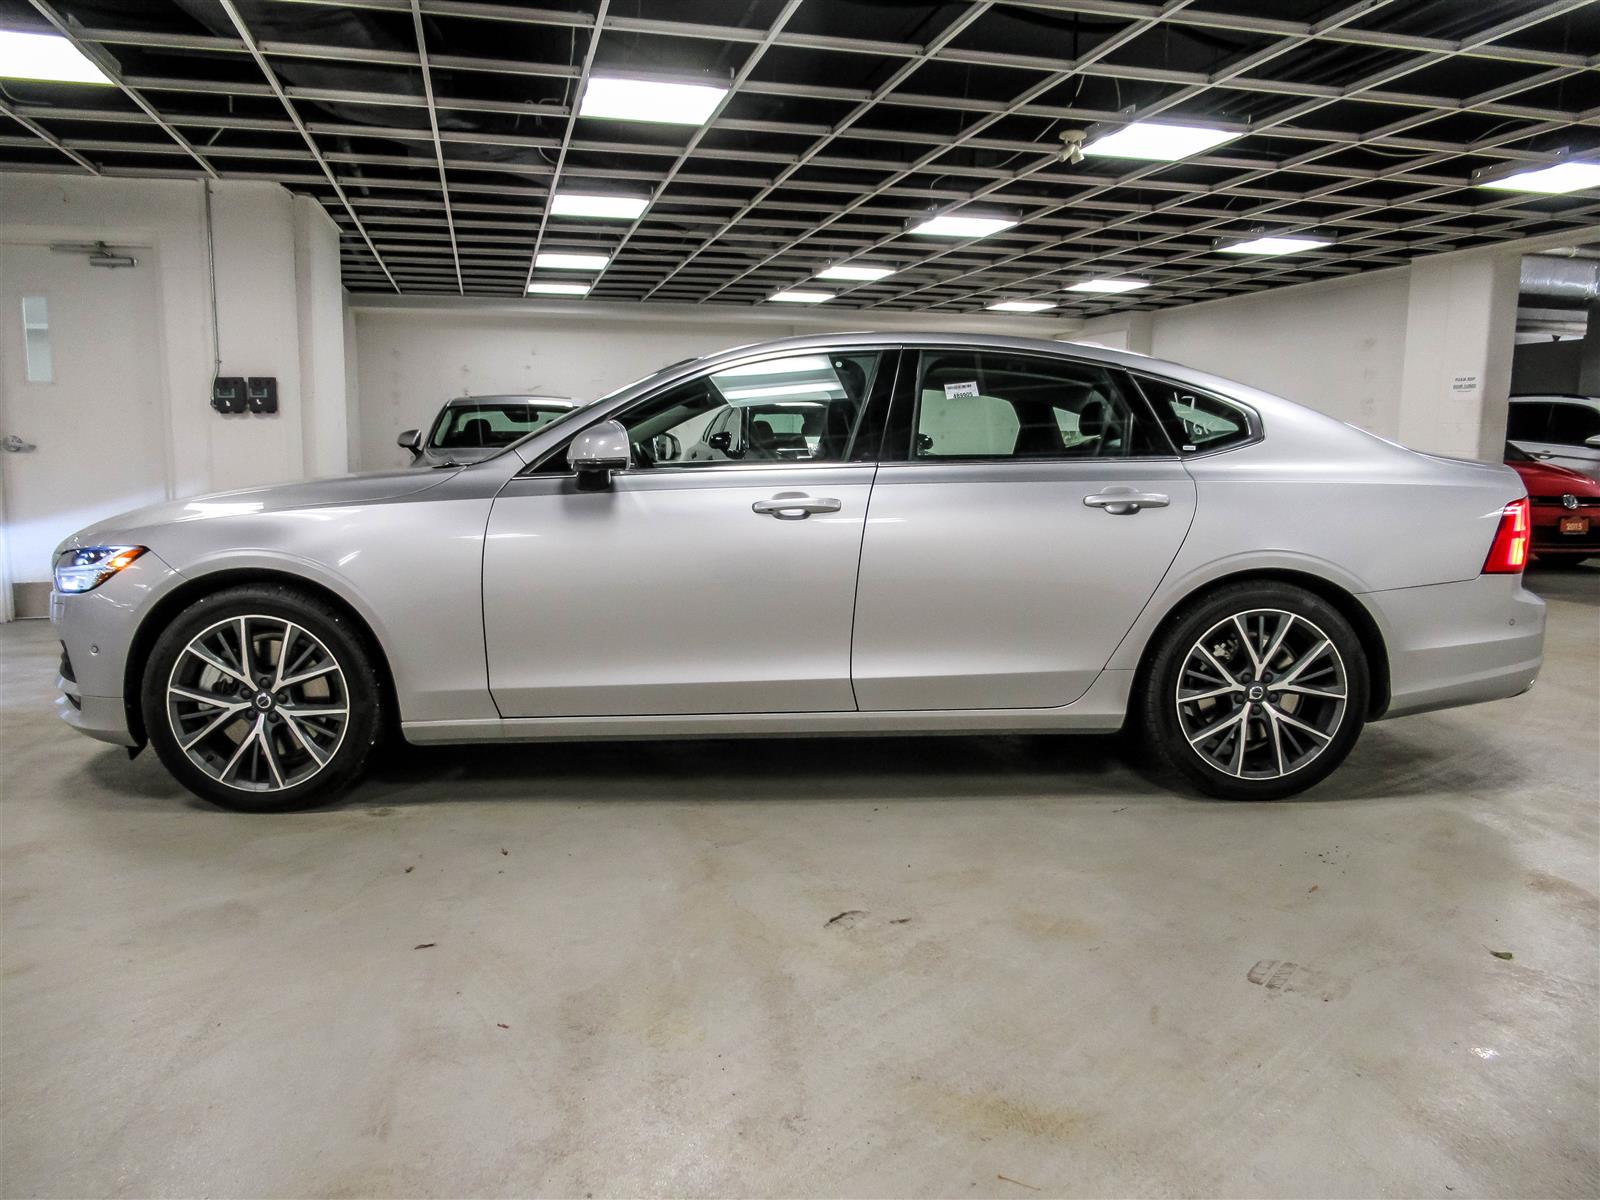 Used 2017 Volvo S90 in Thornhill,ON